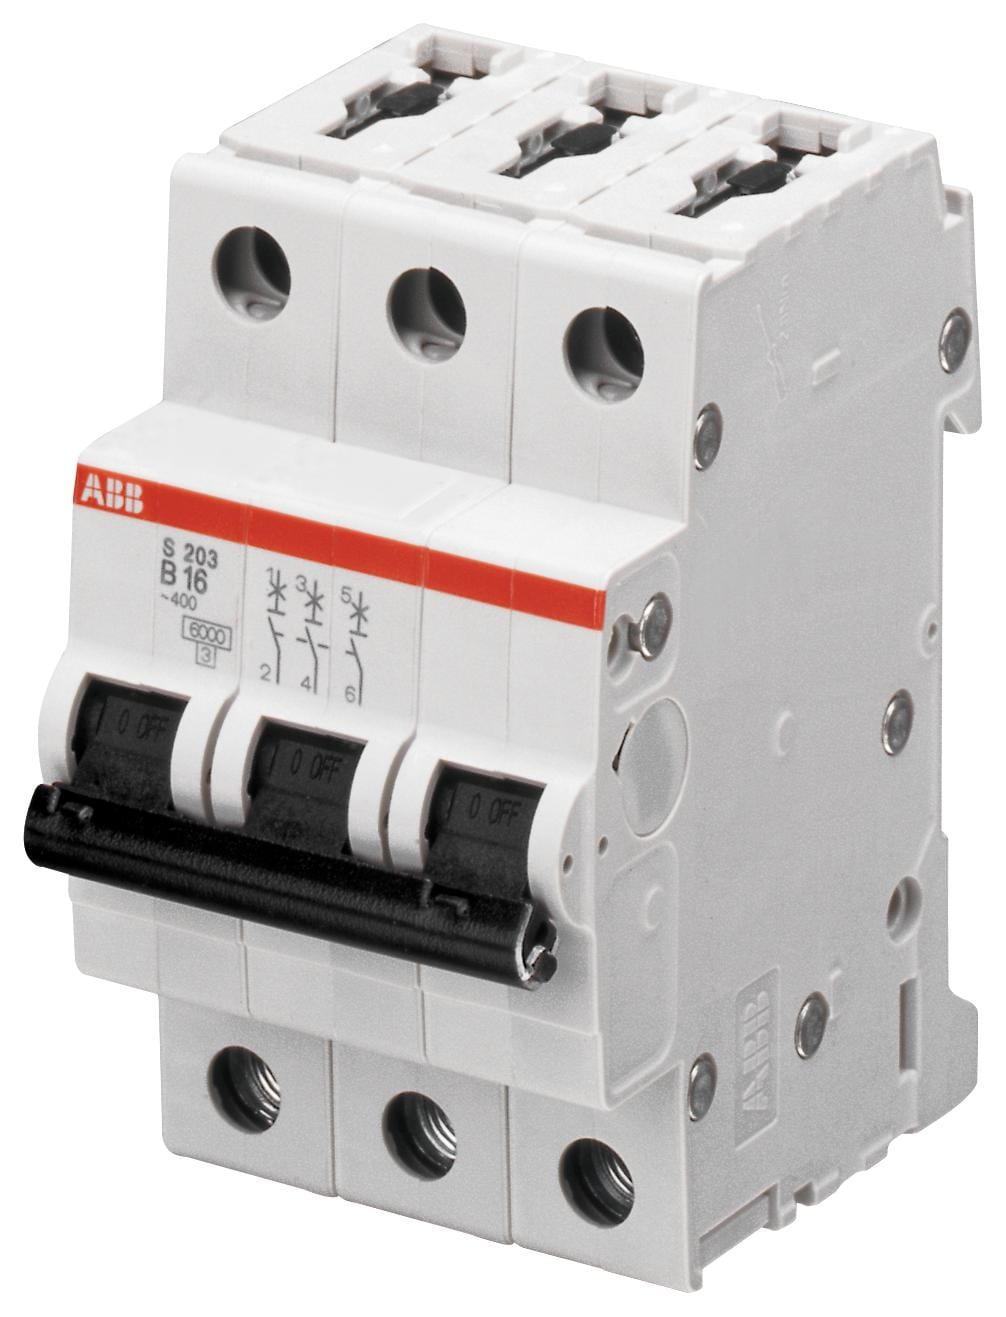 ABB Thermal Magnetic S203-D25 CIRCUIT BREAKER, THERMAL MAG, 3 POLE ABB 2492842 S203-D25